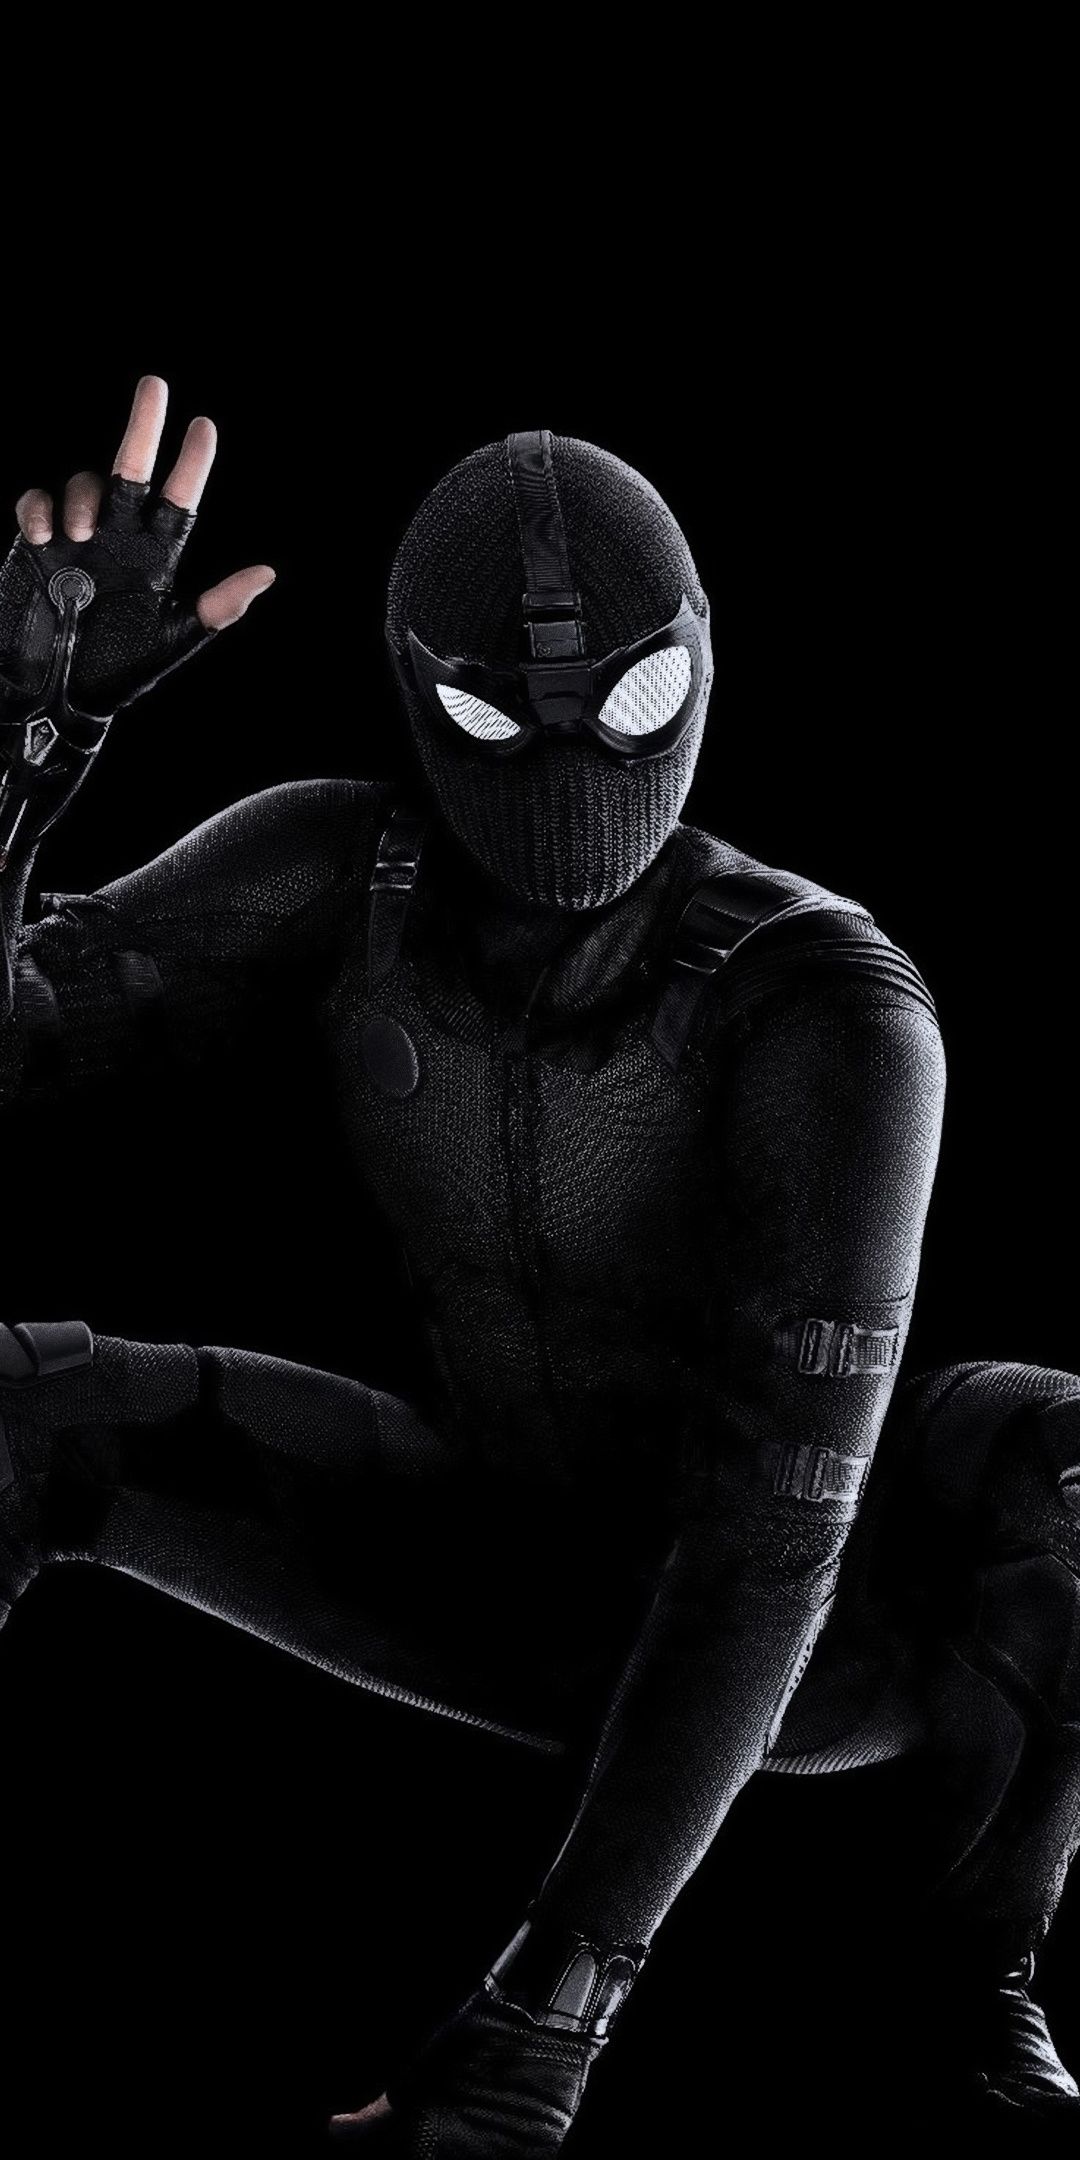 Spider Man: Far From Home, Black Suit Wallpaper. Marvel Spiderman, Marvel Superheroes, Spiderman